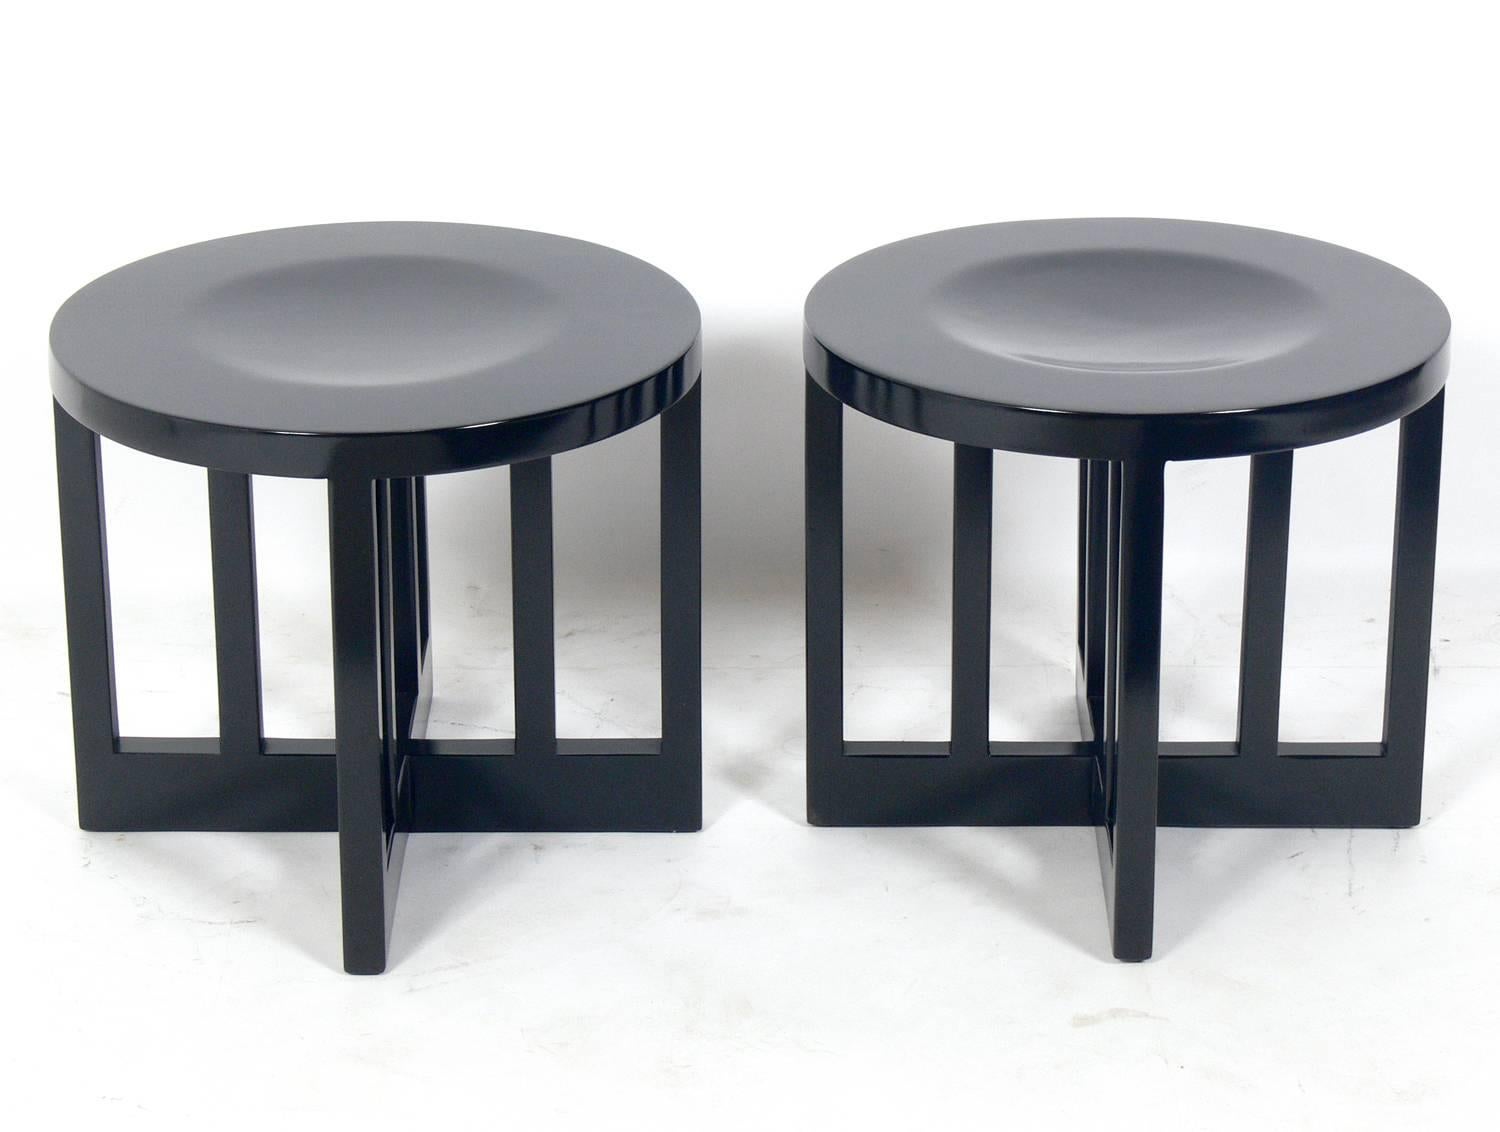 Pair of architectural stools by Richard Meier for Knoll, American, circa 1980s. They are a versatile size and can be used as stools or end or side tables.